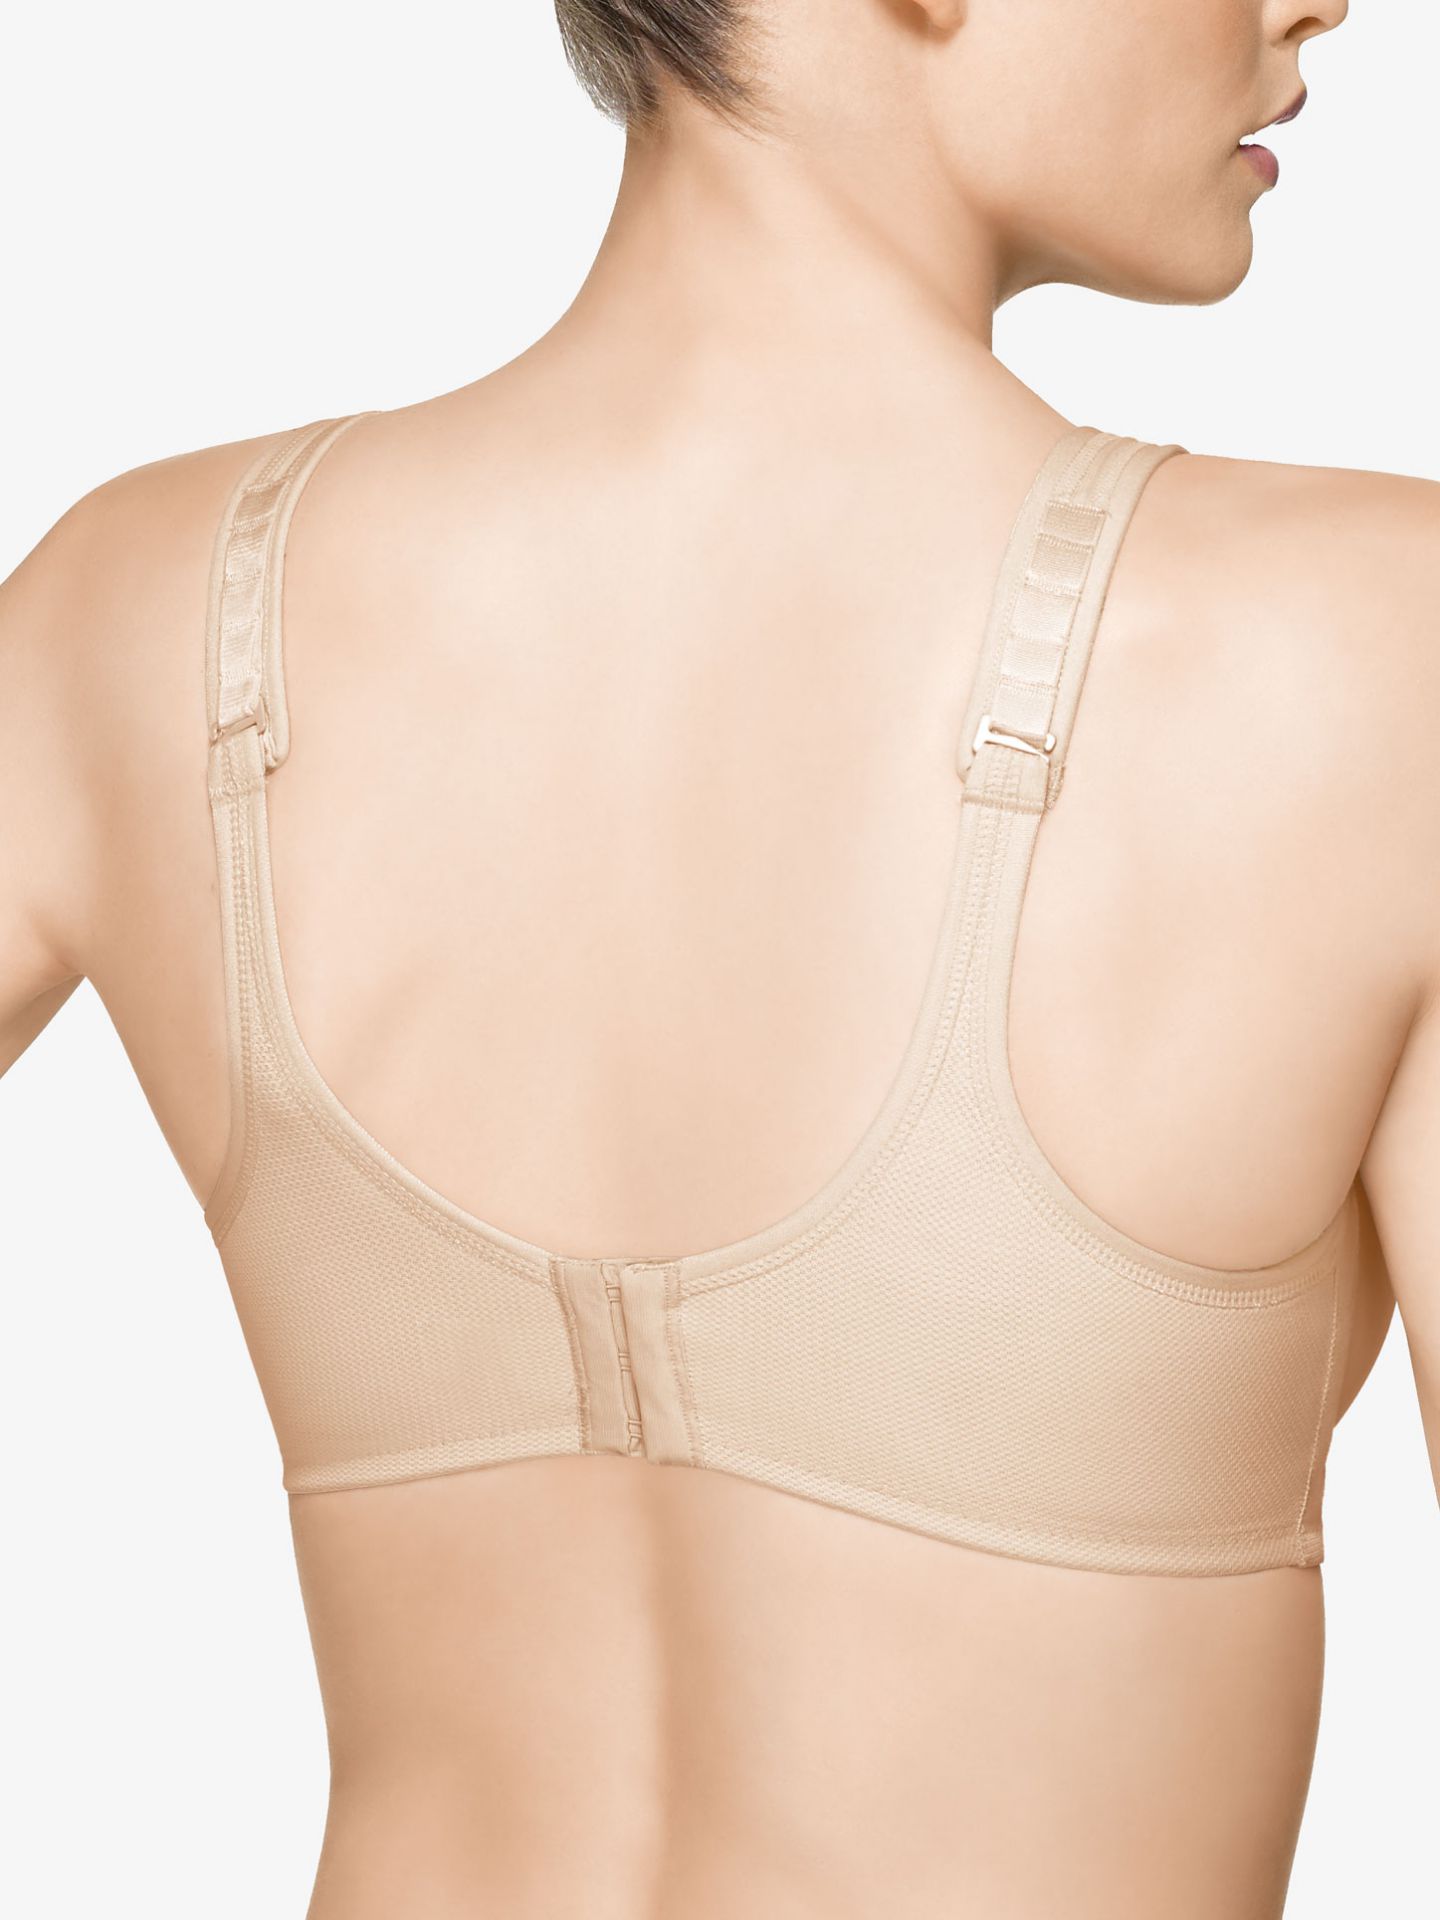 Wacoal 855170 Sports Underwire Bra 40 G Natural Nude 40g for sale online